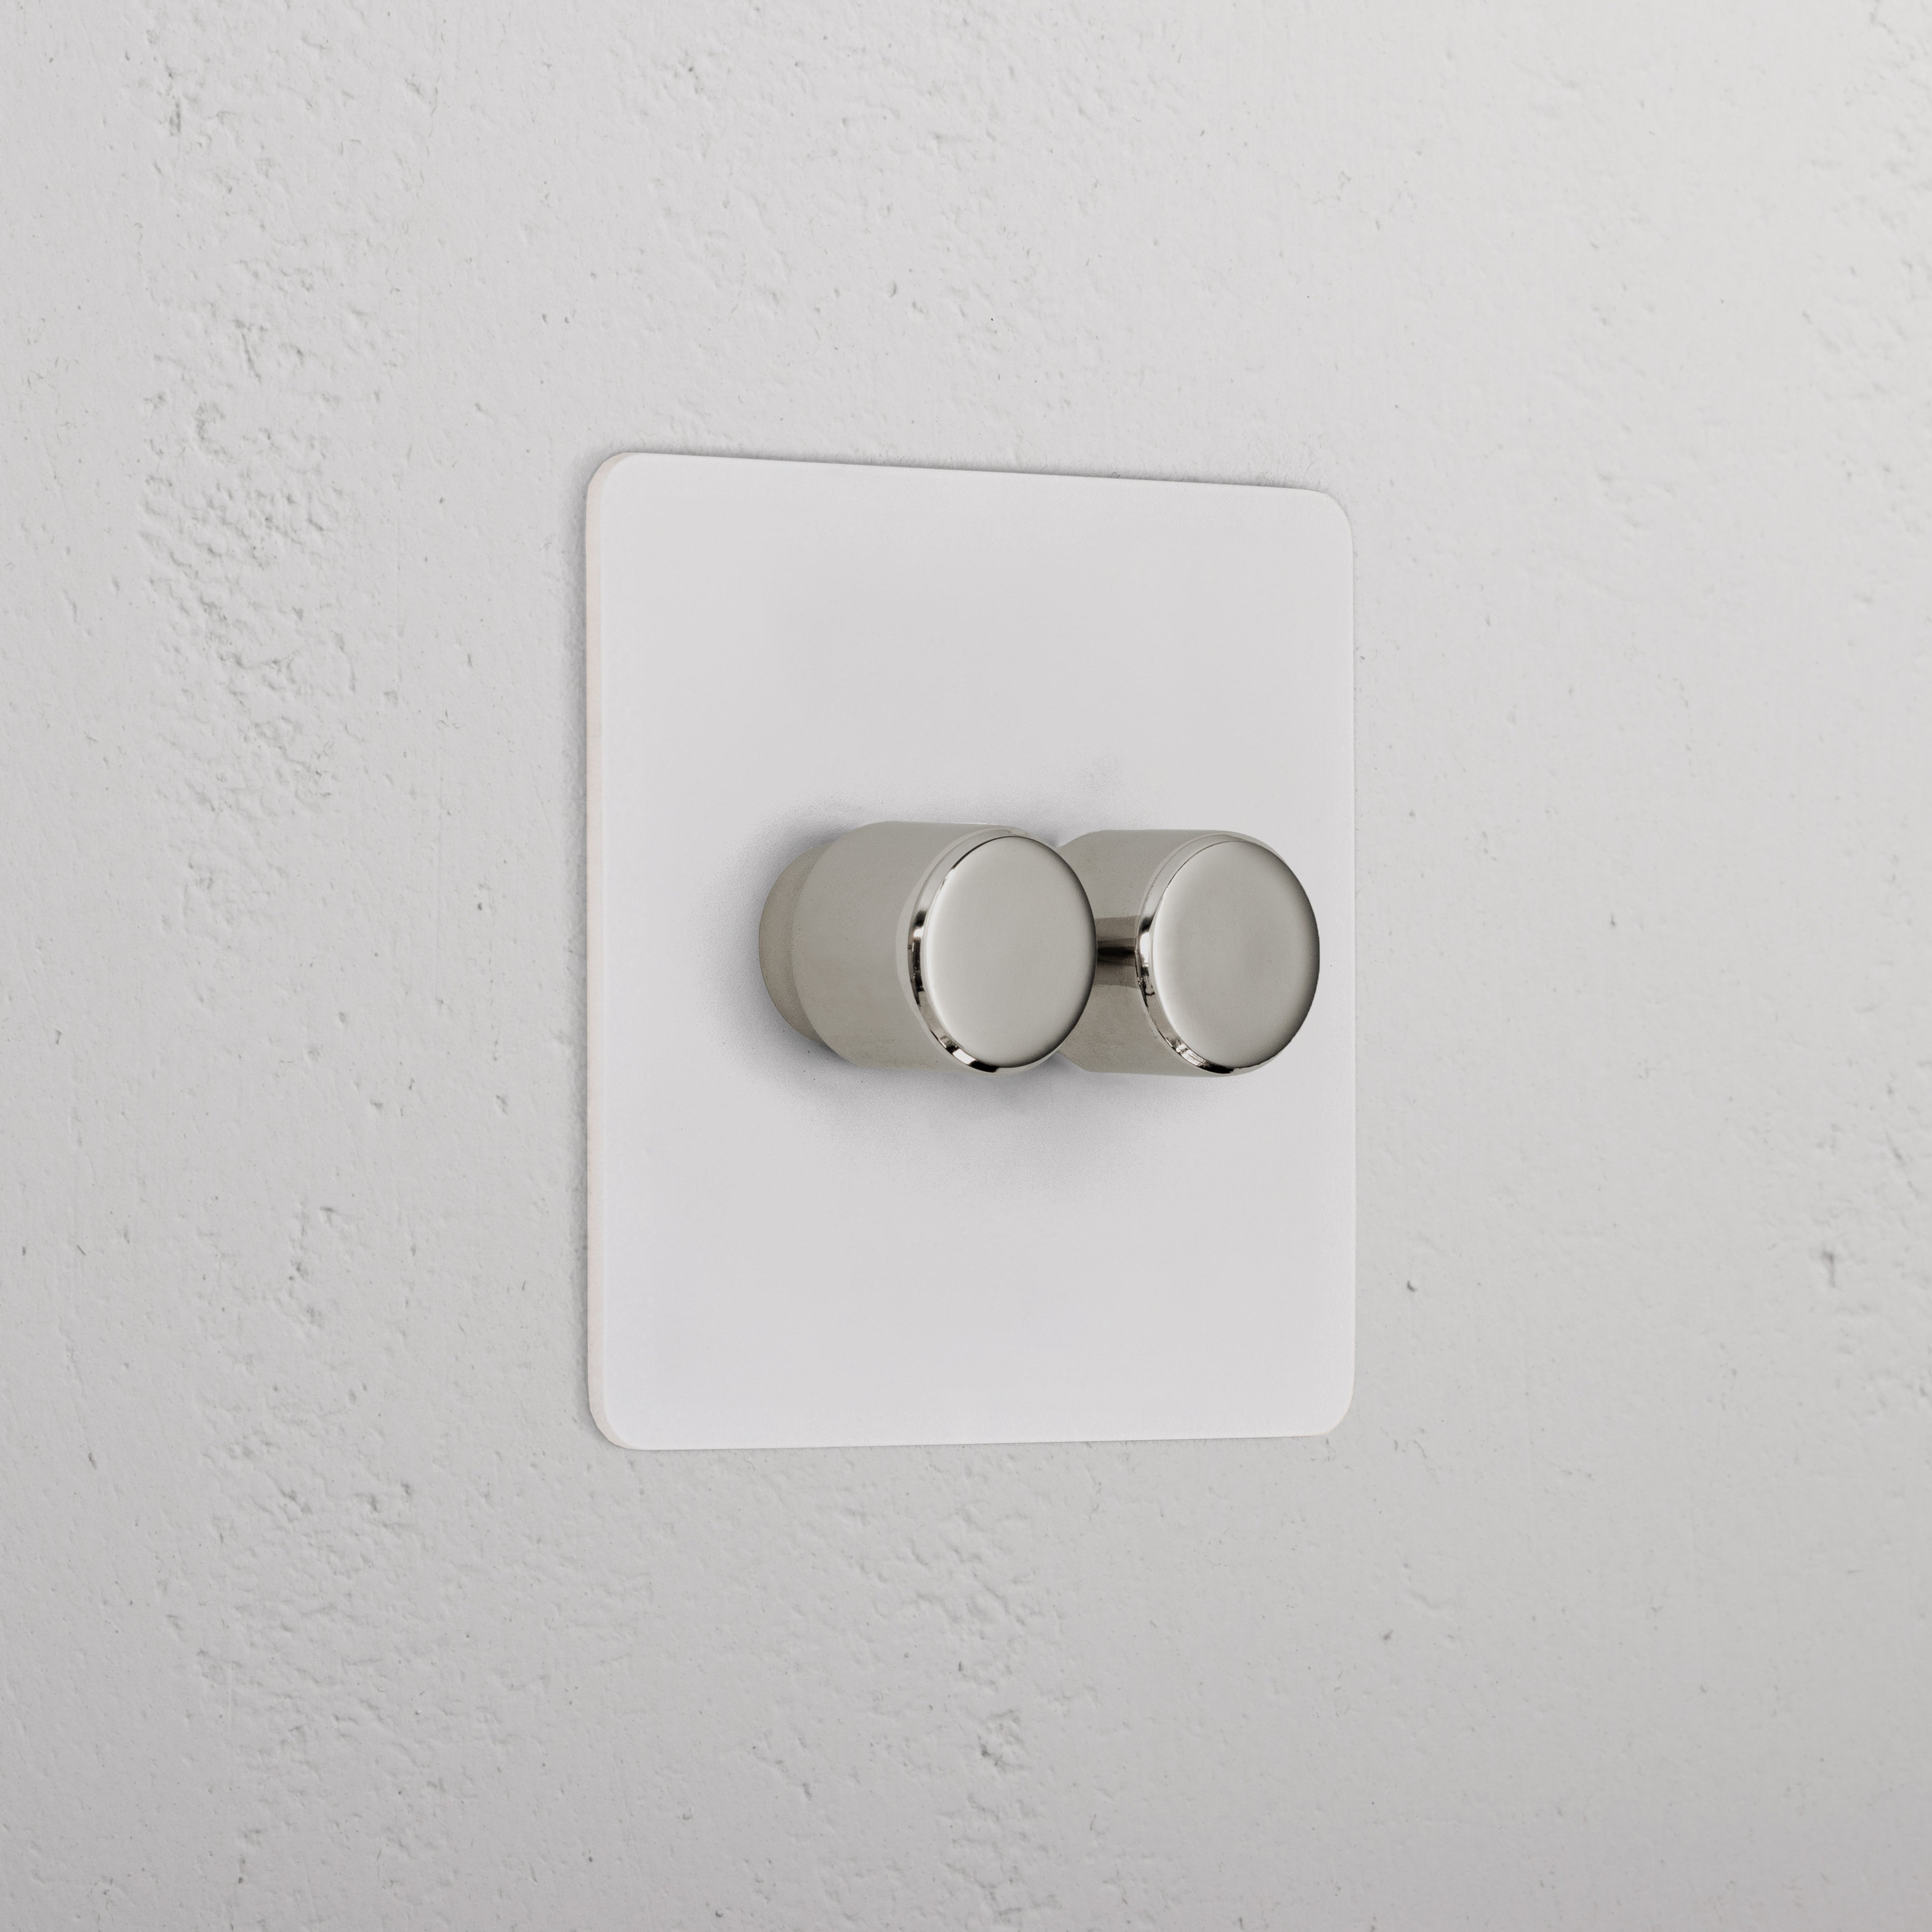 2G Dimmer Switch _ Paintable Polished Nickel